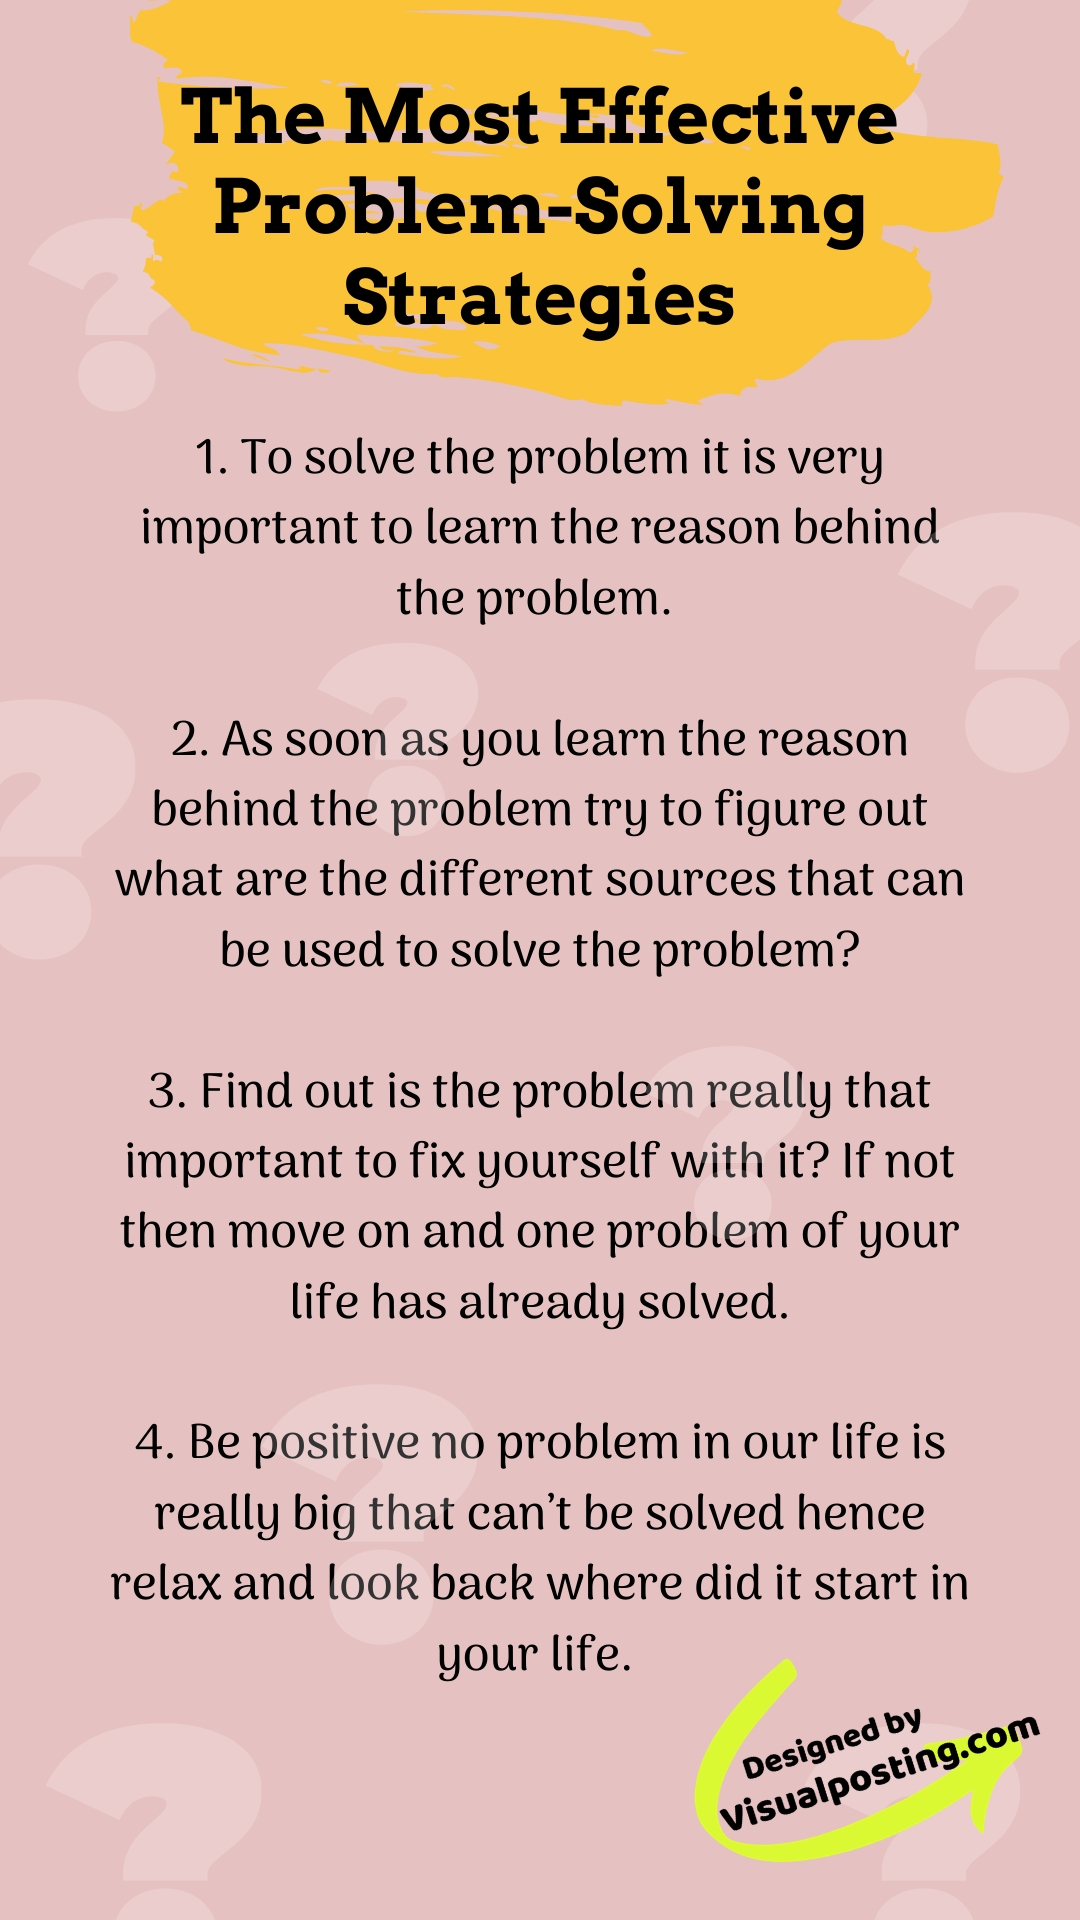 example of positive problem solving strategies